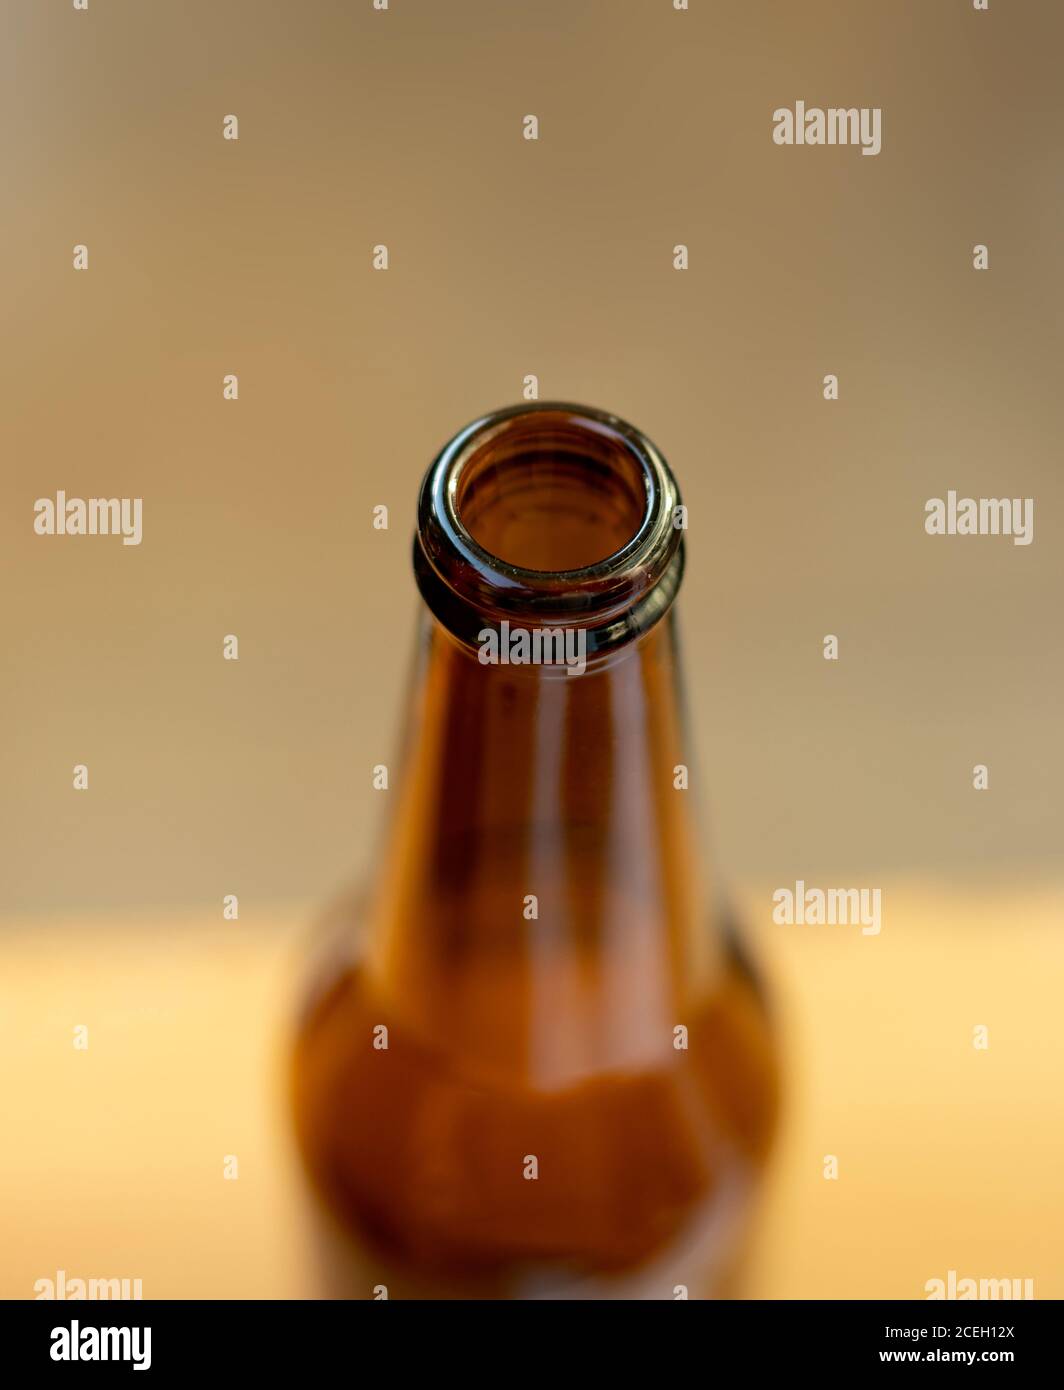 Close-up view of brown glass bottle, focus on the rim. Stock Photo